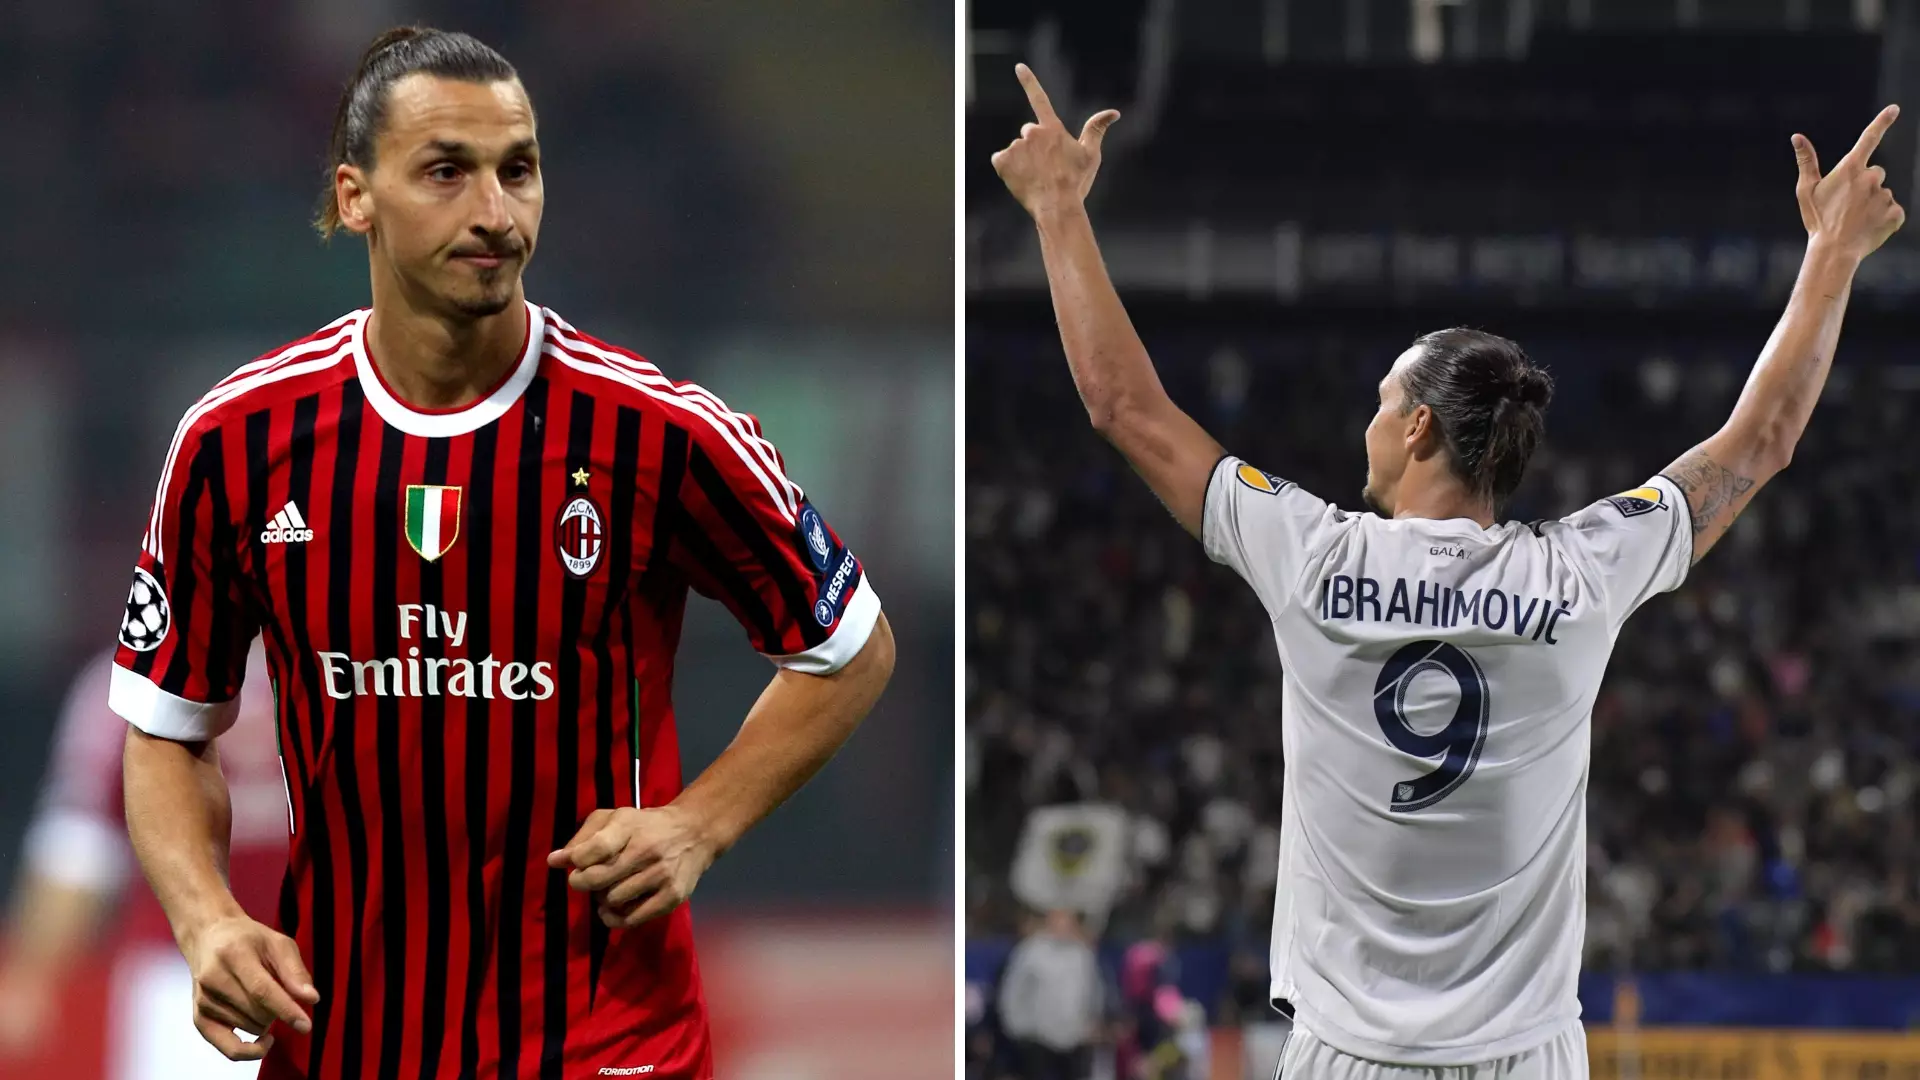 AC Milan Have Made A €2.2m Contract Offer To Zlatan Ibrahimović